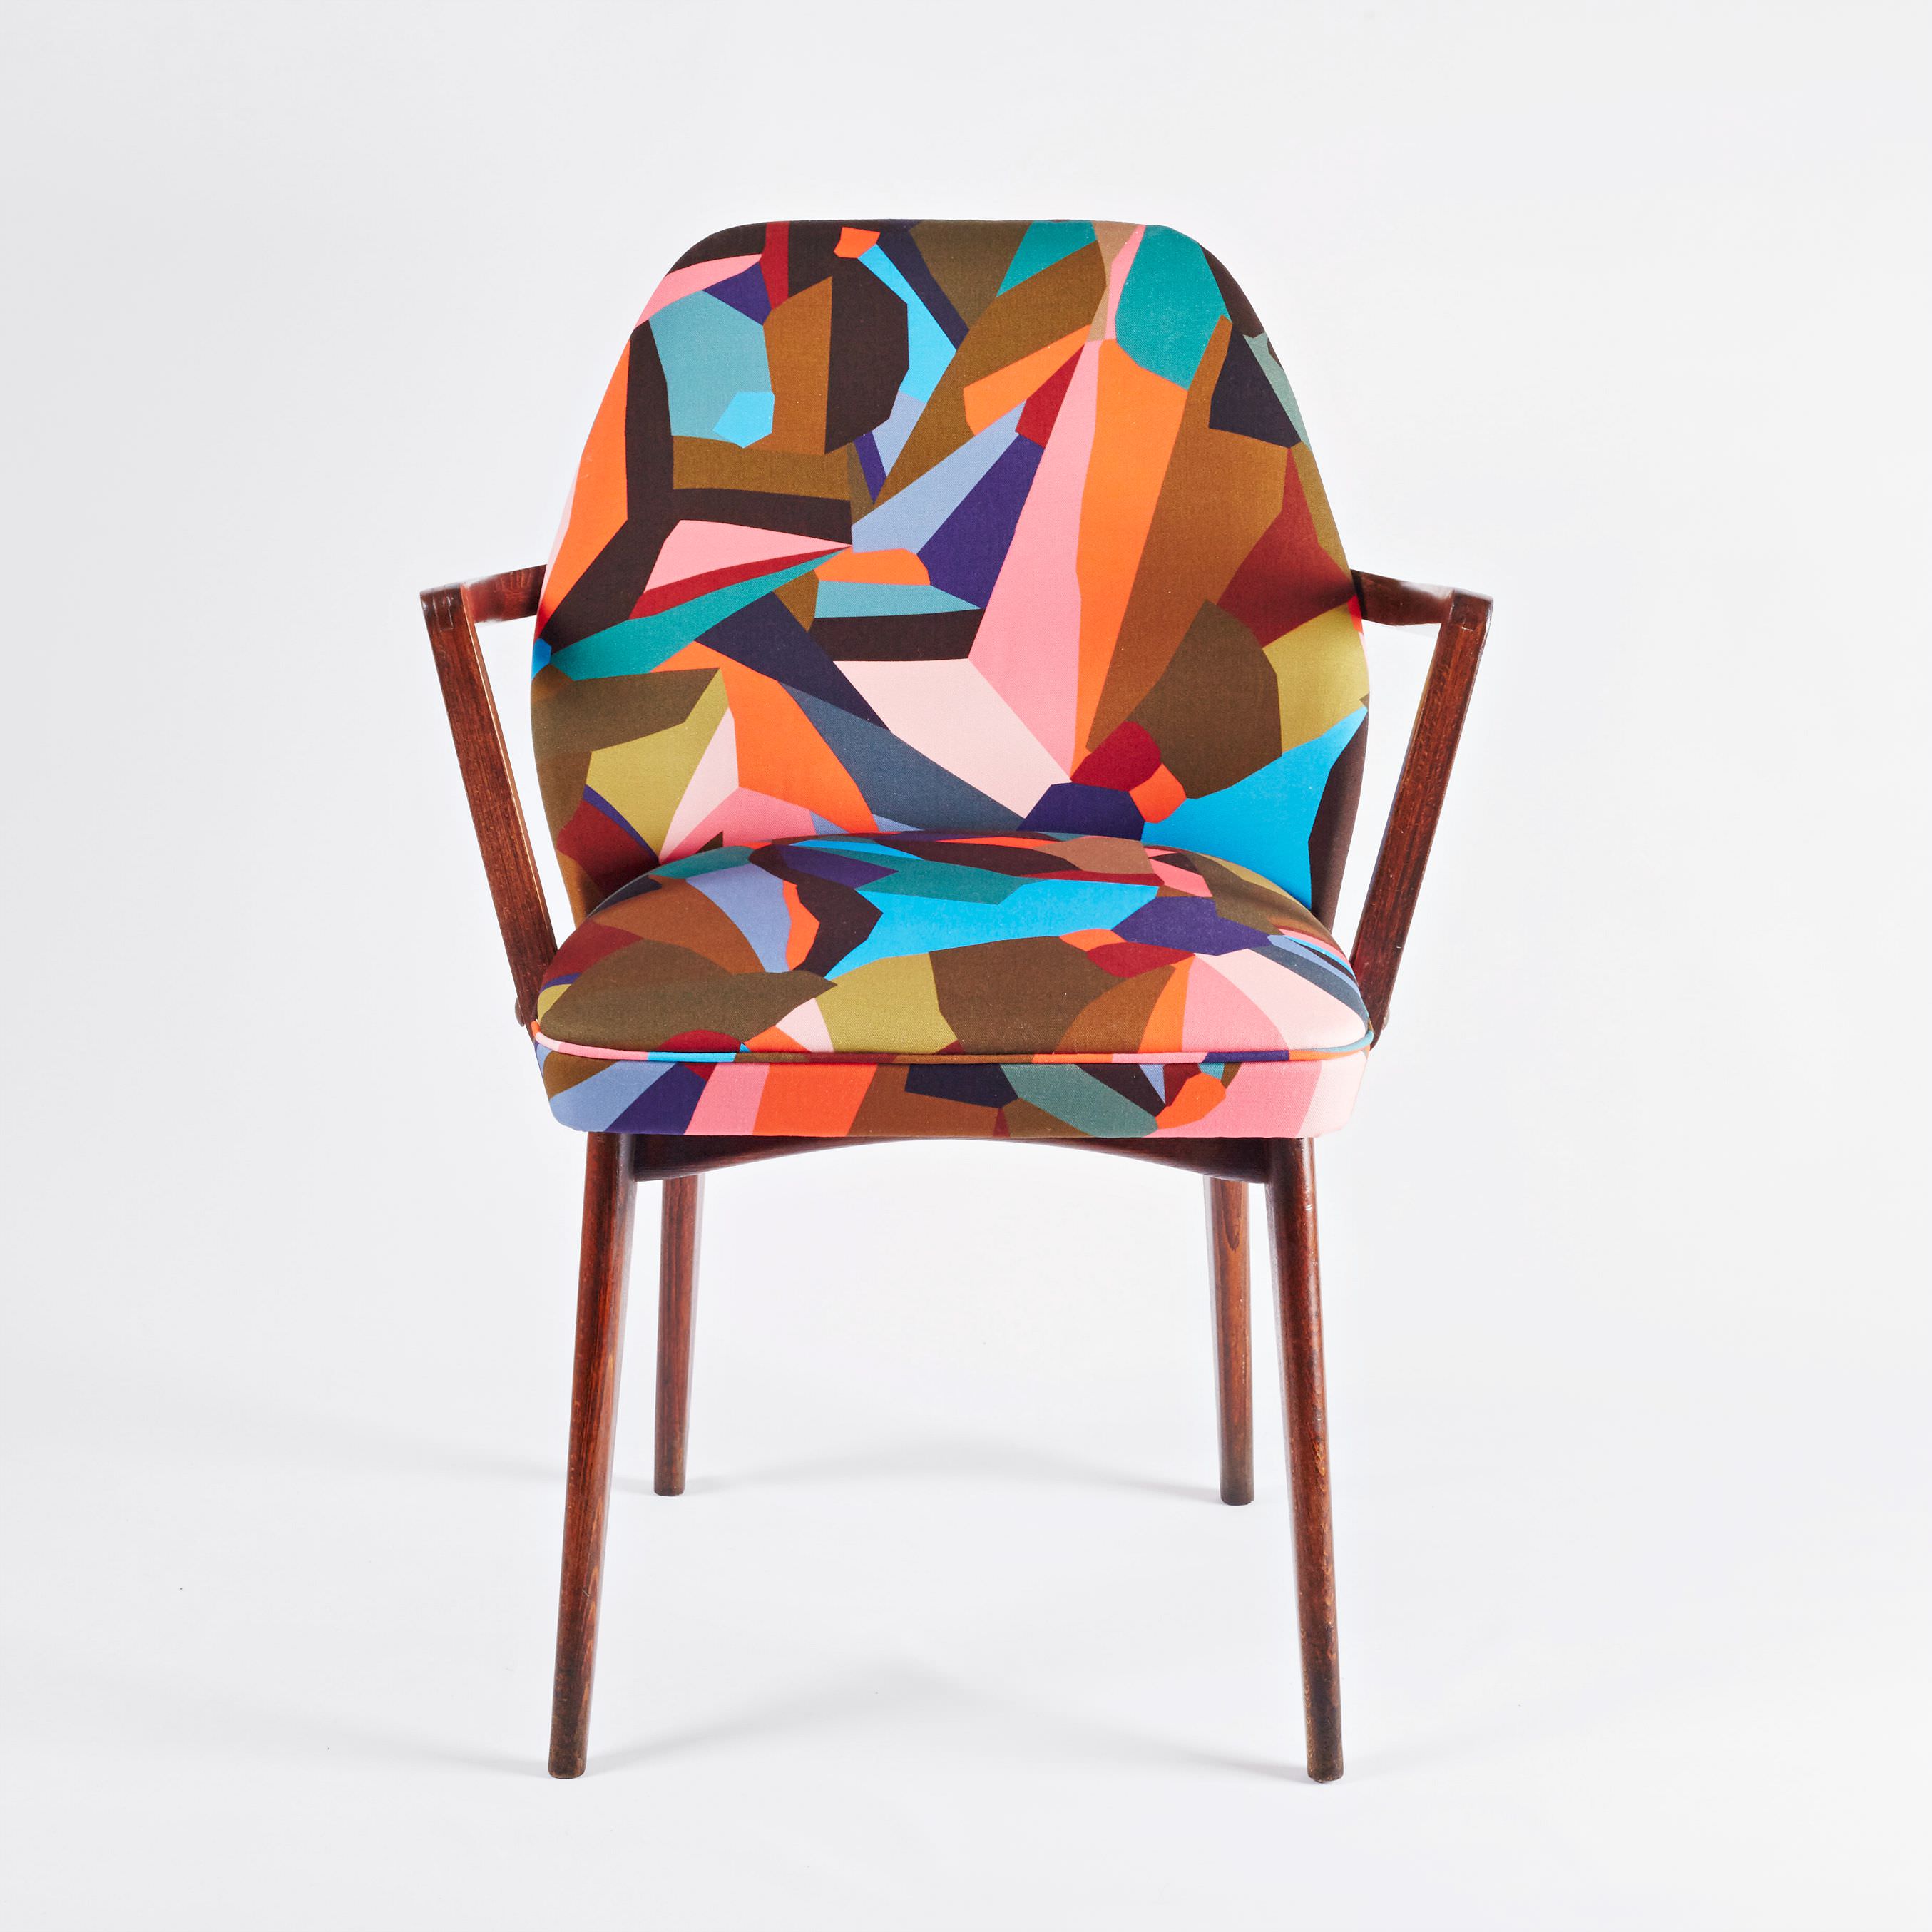 Tent-London-2015-chair-by-Kitty-Mc-Call-on-Little-Big-Bell